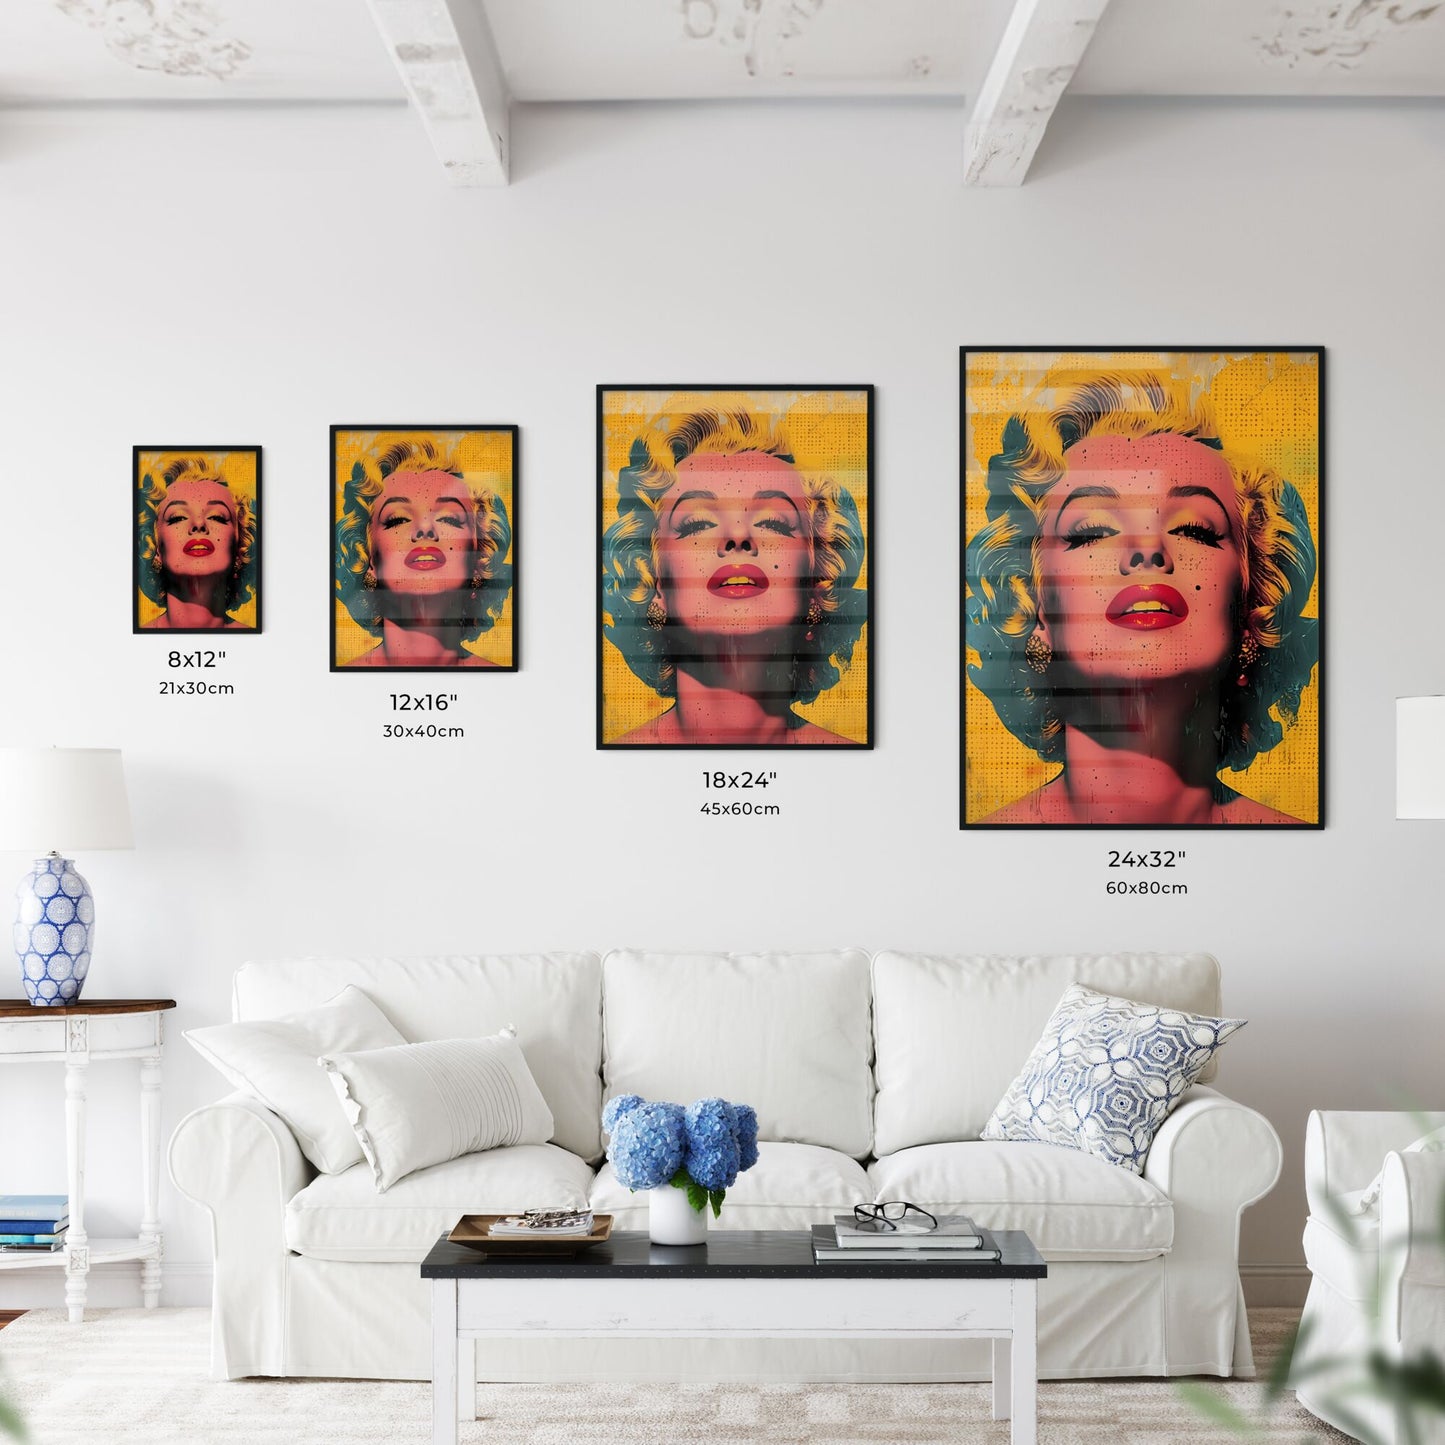 A striking half-body portrait of Marilyn Monroe - Art print of a woman with blonde hair and red lipstick Default Title